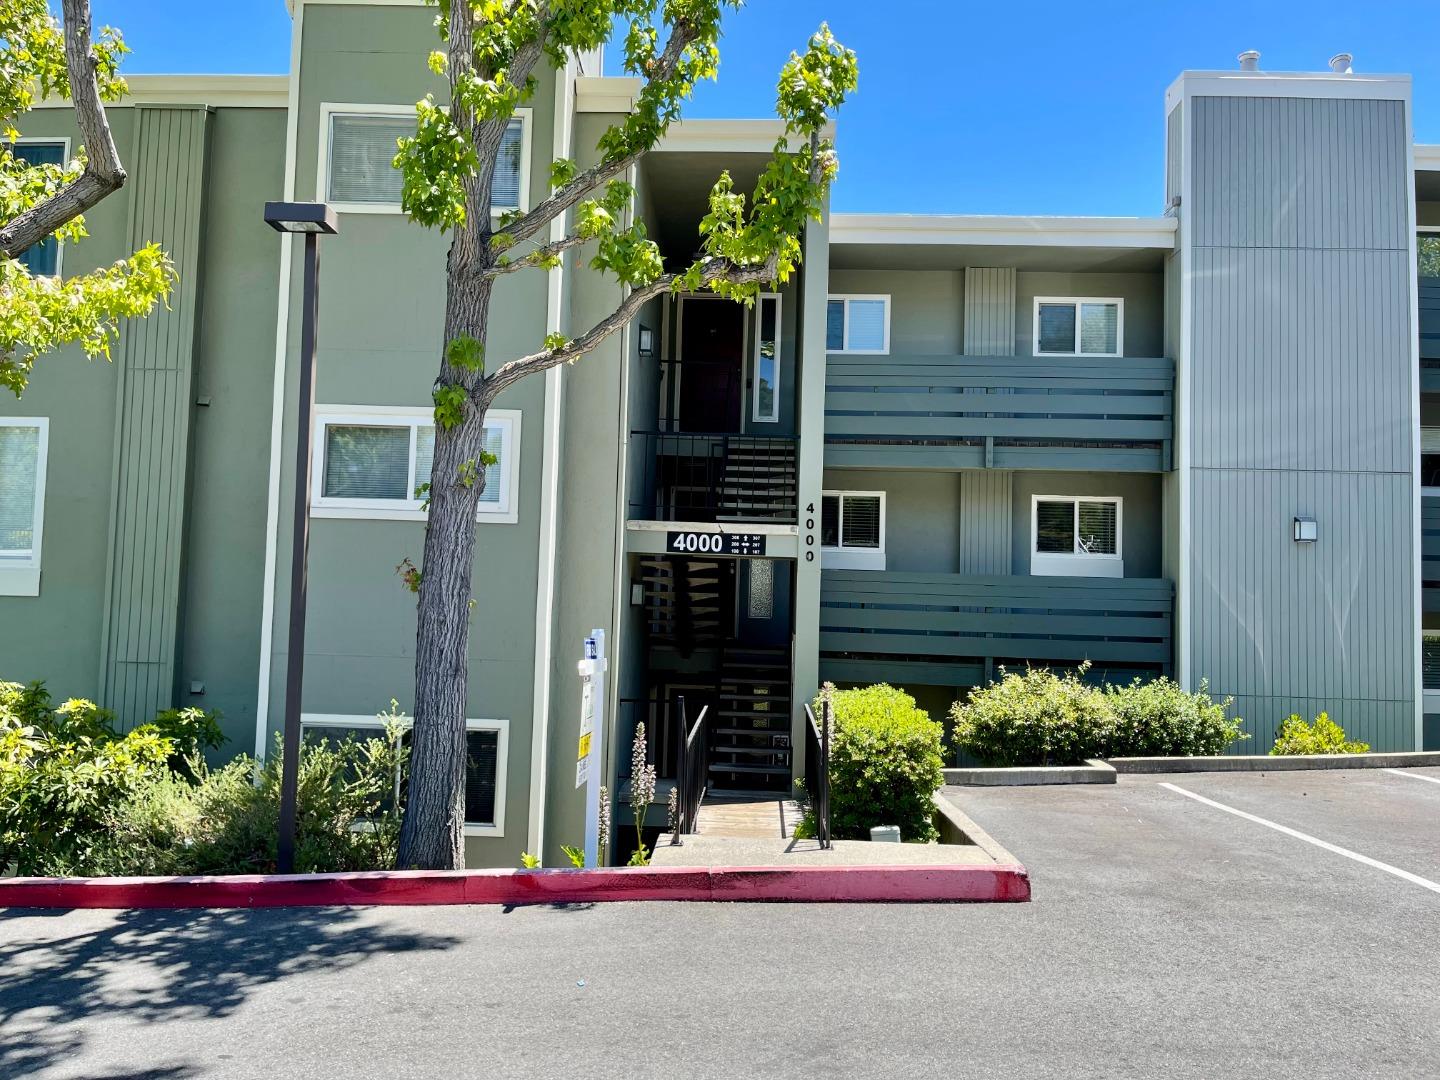 2 Bedroom Condo in desirable Farm Hill Vista Community. New carpeting, fresh paint, ceiling fan, and in-unit laundry. Patio deck, 1 carport with storage space. Enjoy the community swimming pool, and clubhouse. Conveniently located minutes from downtown Redwood City, shopping, and restaurants. Easy access to I-280.